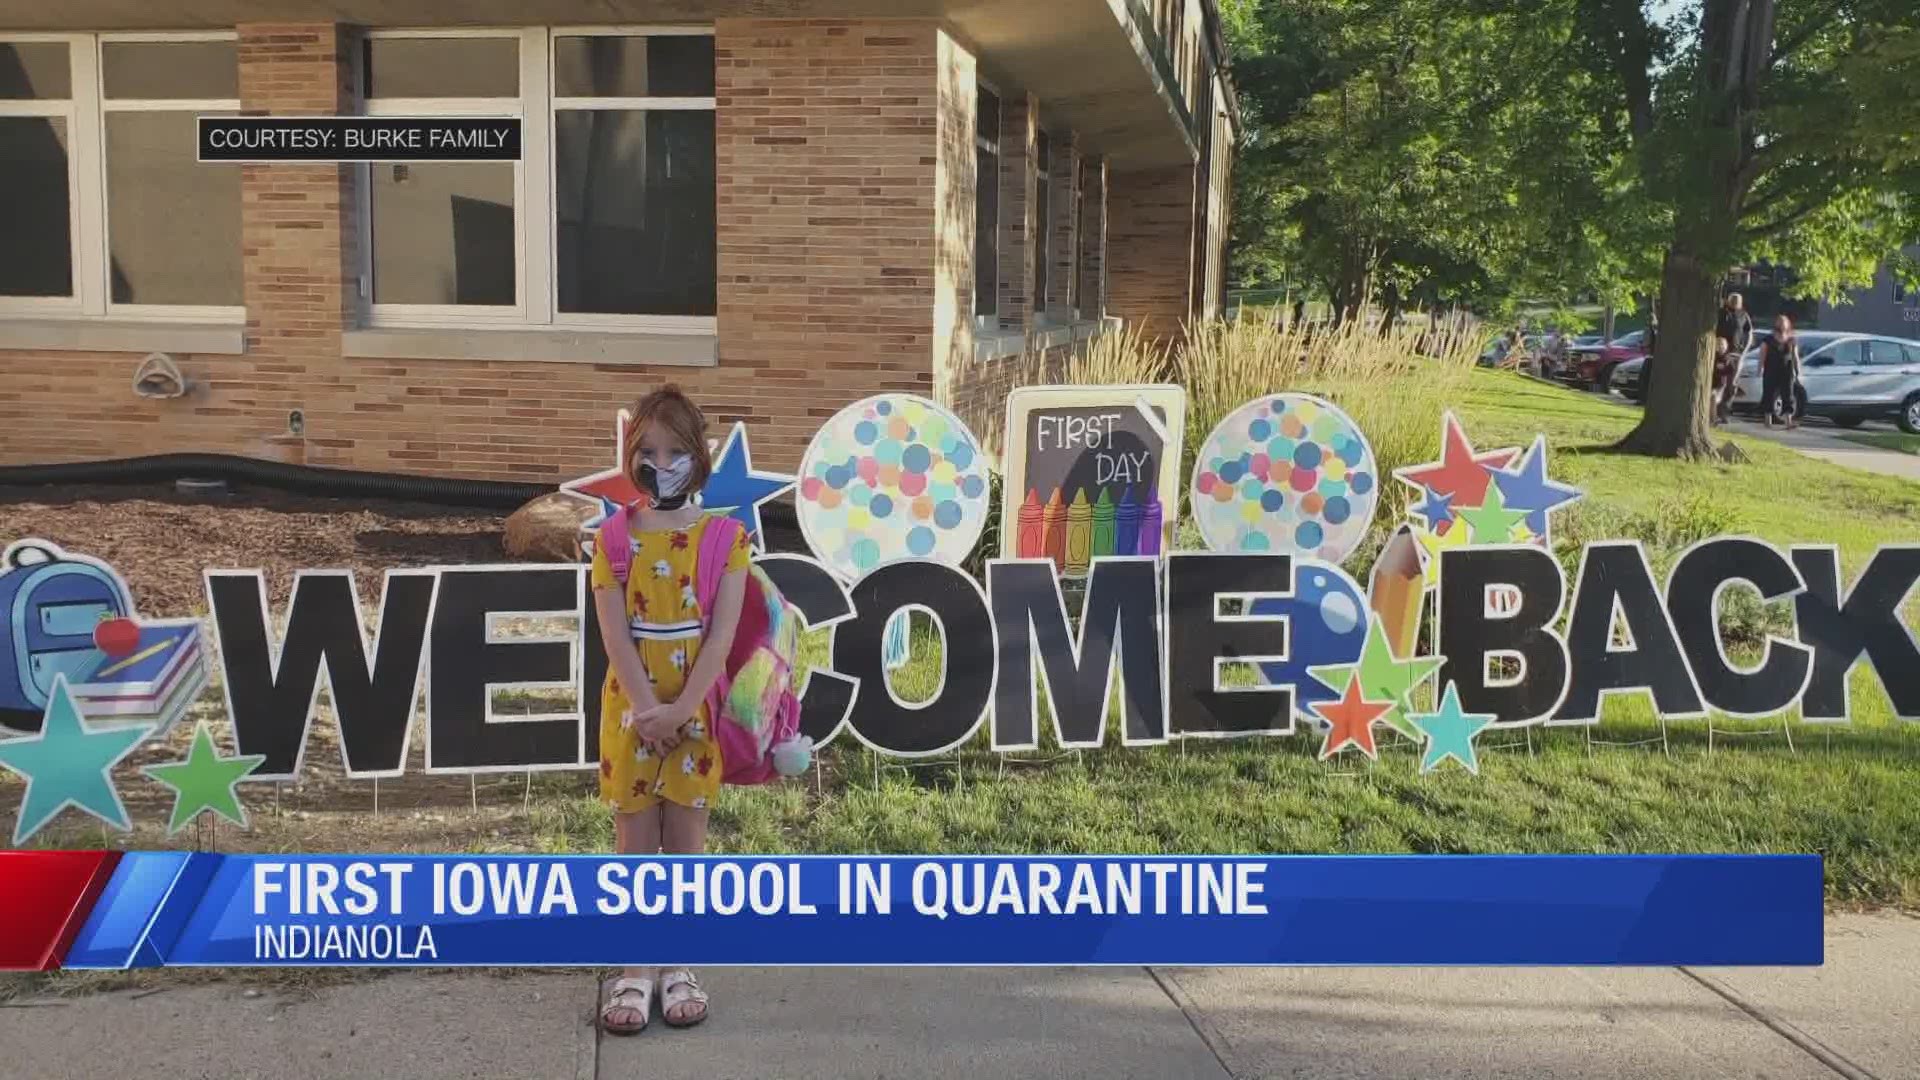 Mia Burke, 6, now has to quarantine after a classmate tested positive for COVID-19 during the first week of school.